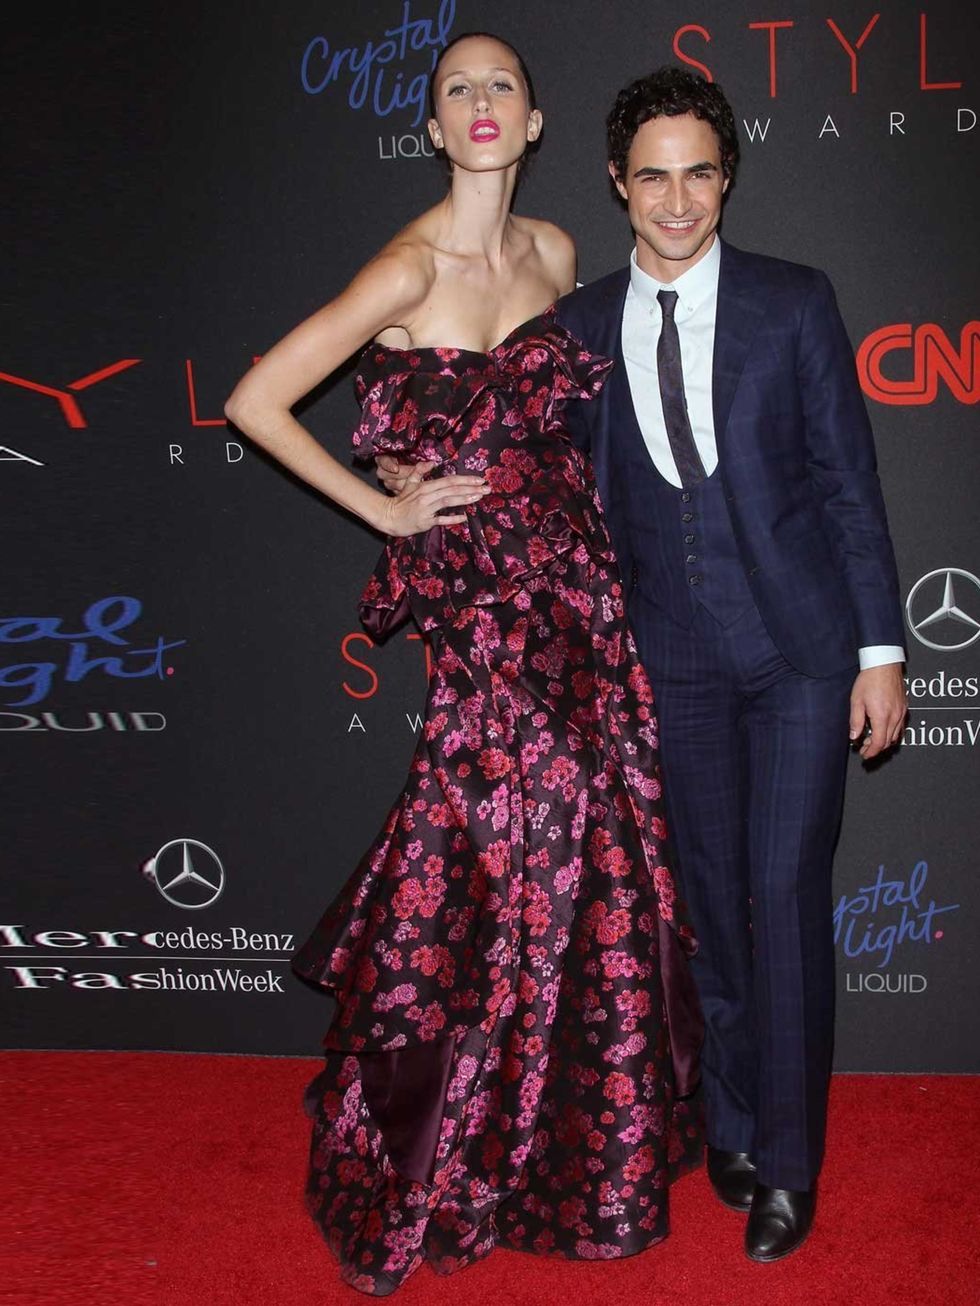 <p>Anna Cleveland and <a href="http://www.elleuk.com/elle-tv/catwalk/zac-posen-autumn-winter-13">Zac Posen</a>, who was named Designer of the Year, attends the 2013 Style Awards at Lincoln Center on 4 September 2013.</p>